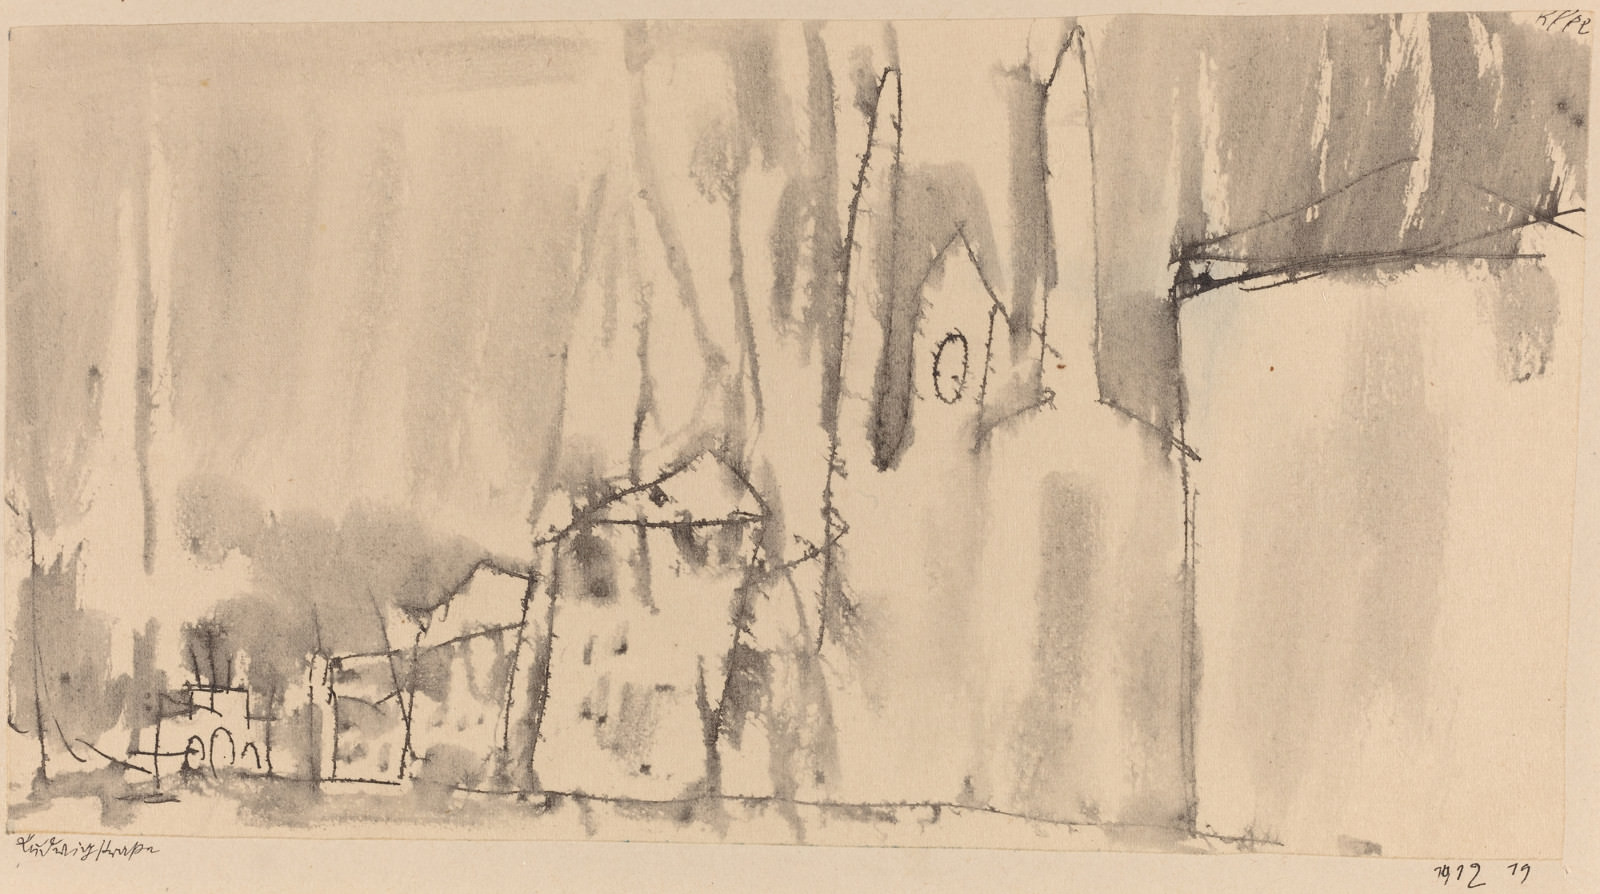 Fig. 8 – Paul Klee, Ludwigstrasse, 1912, Pen and black ink with wash on cream paper, laid on cardboard, overall: 9.9 x 19 cm (3 7/8 x 7 1/2 in.). National Gallery of Art, Washington. Gift of Benjamin and Lillian Hertzberg.